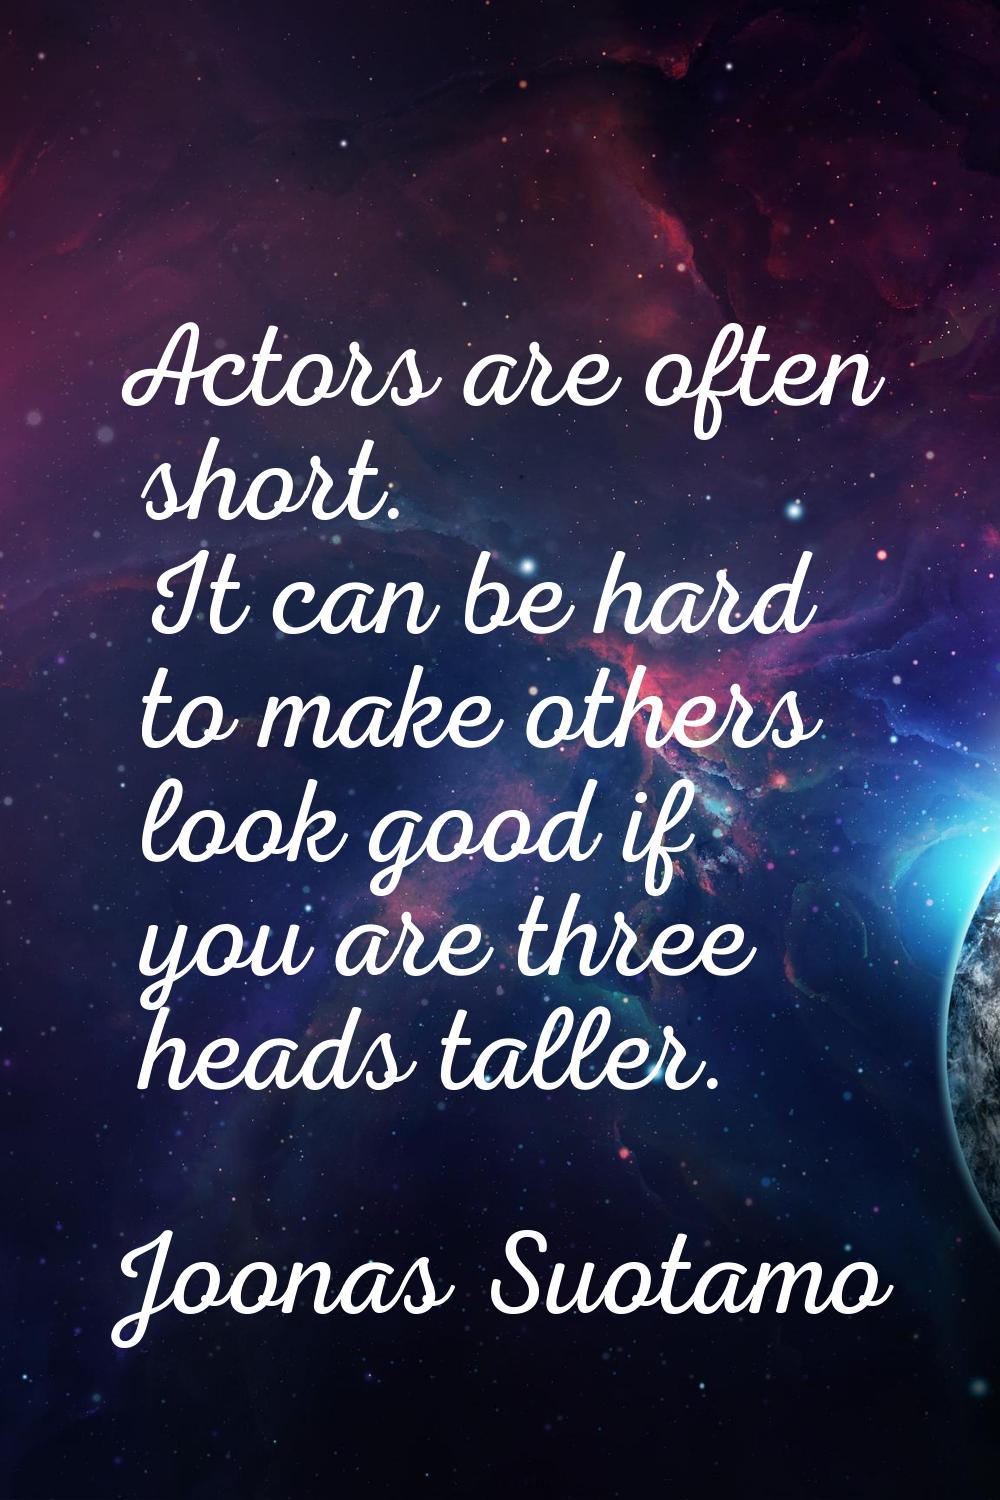 Actors are often short. It can be hard to make others look good if you are three heads taller.